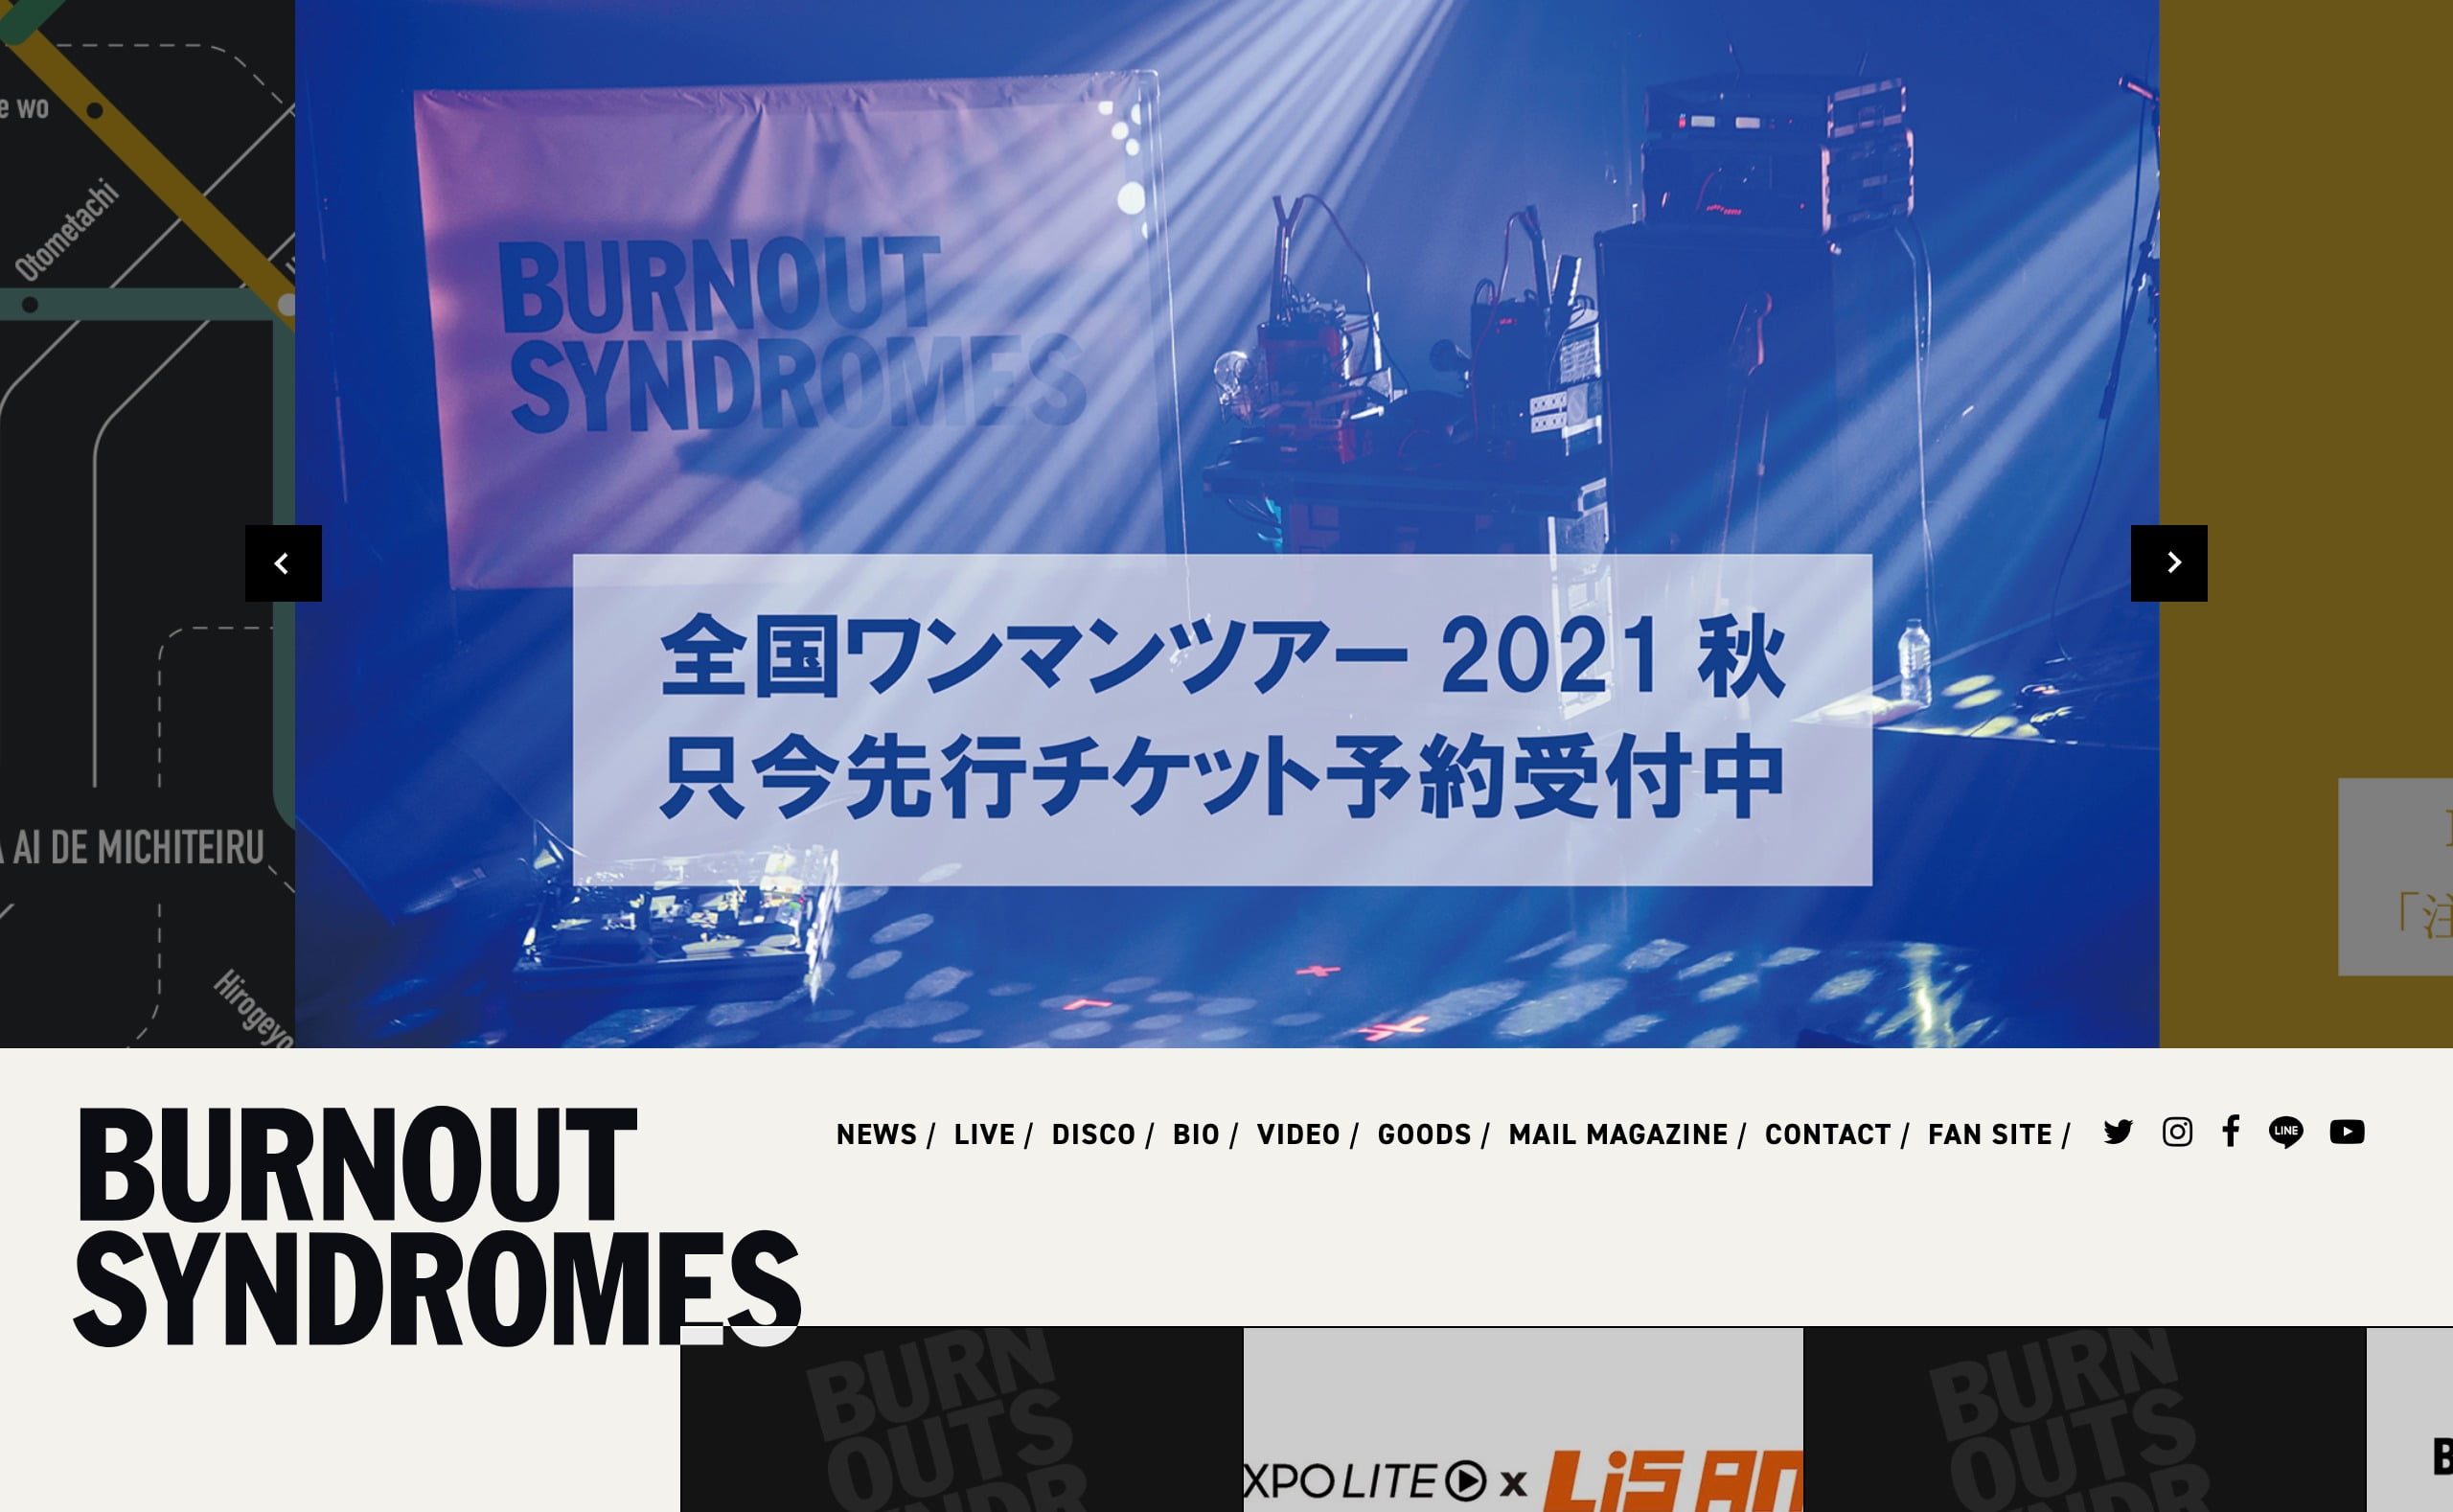 BURNOUT SYNDROMES OFFICIAL WEB SITE | MUSIC WEB CLIPS -  バンド・アーティスト・音楽関連のWEBデザイン ギャラリーサイト